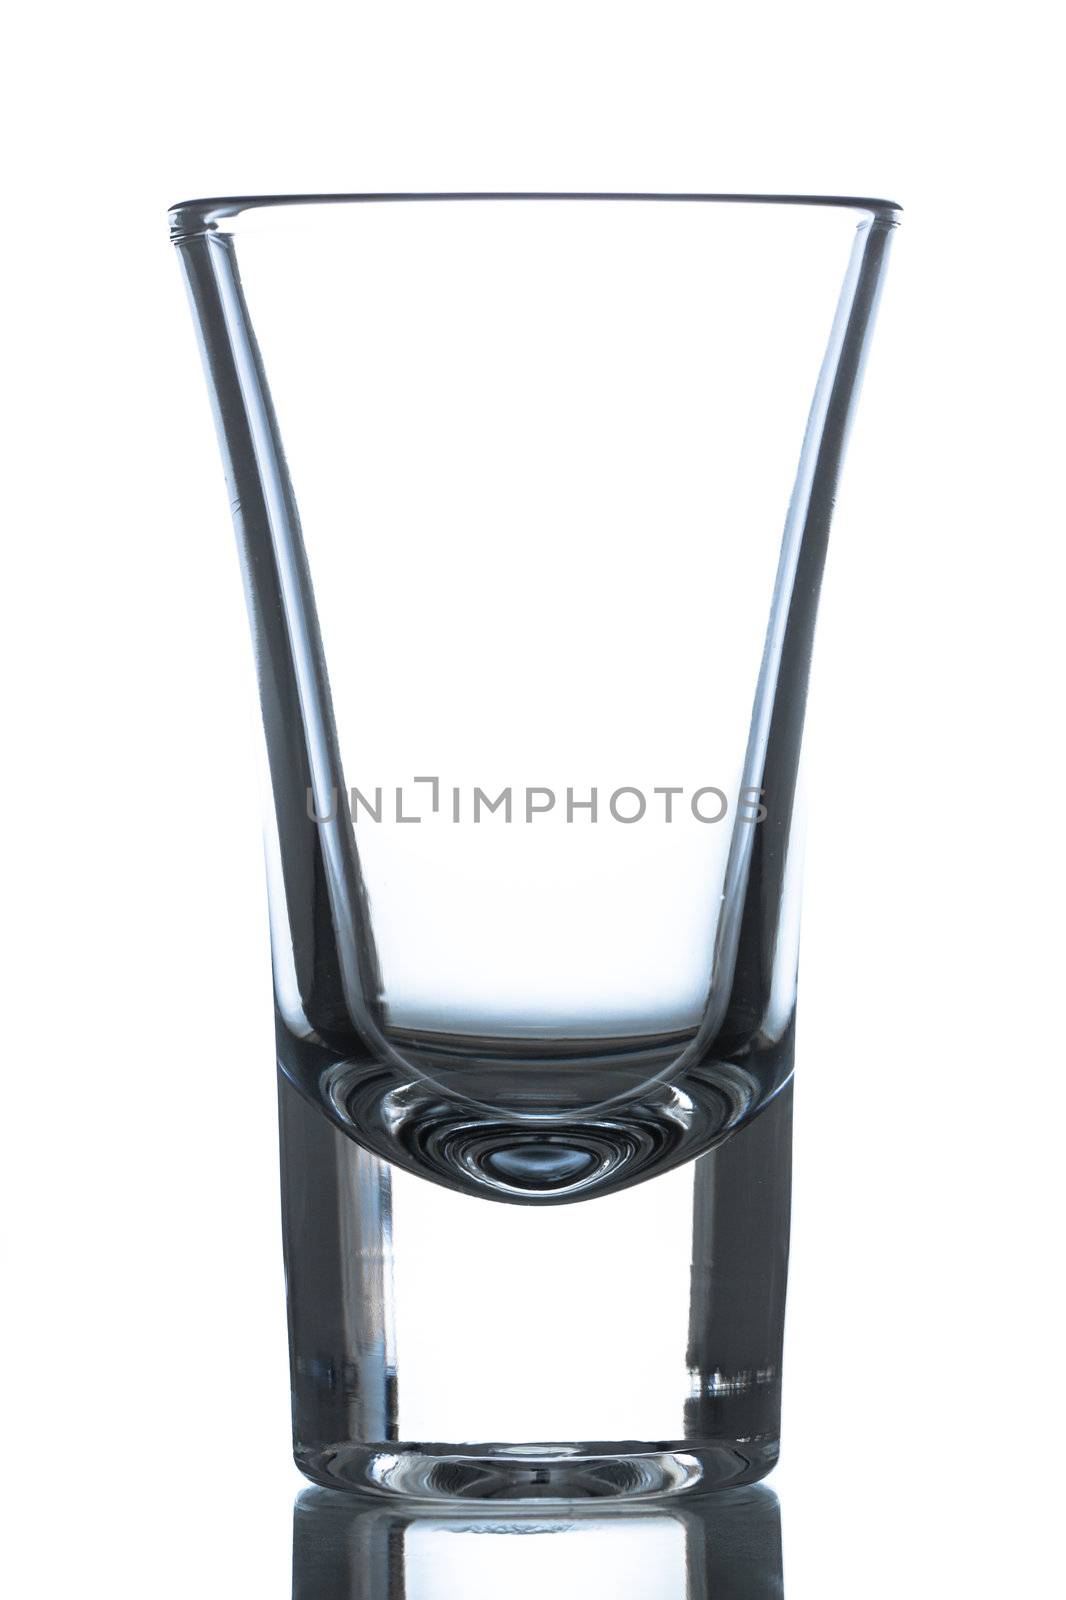 An empty shot glass on a refelctive surface. Isolated on white.